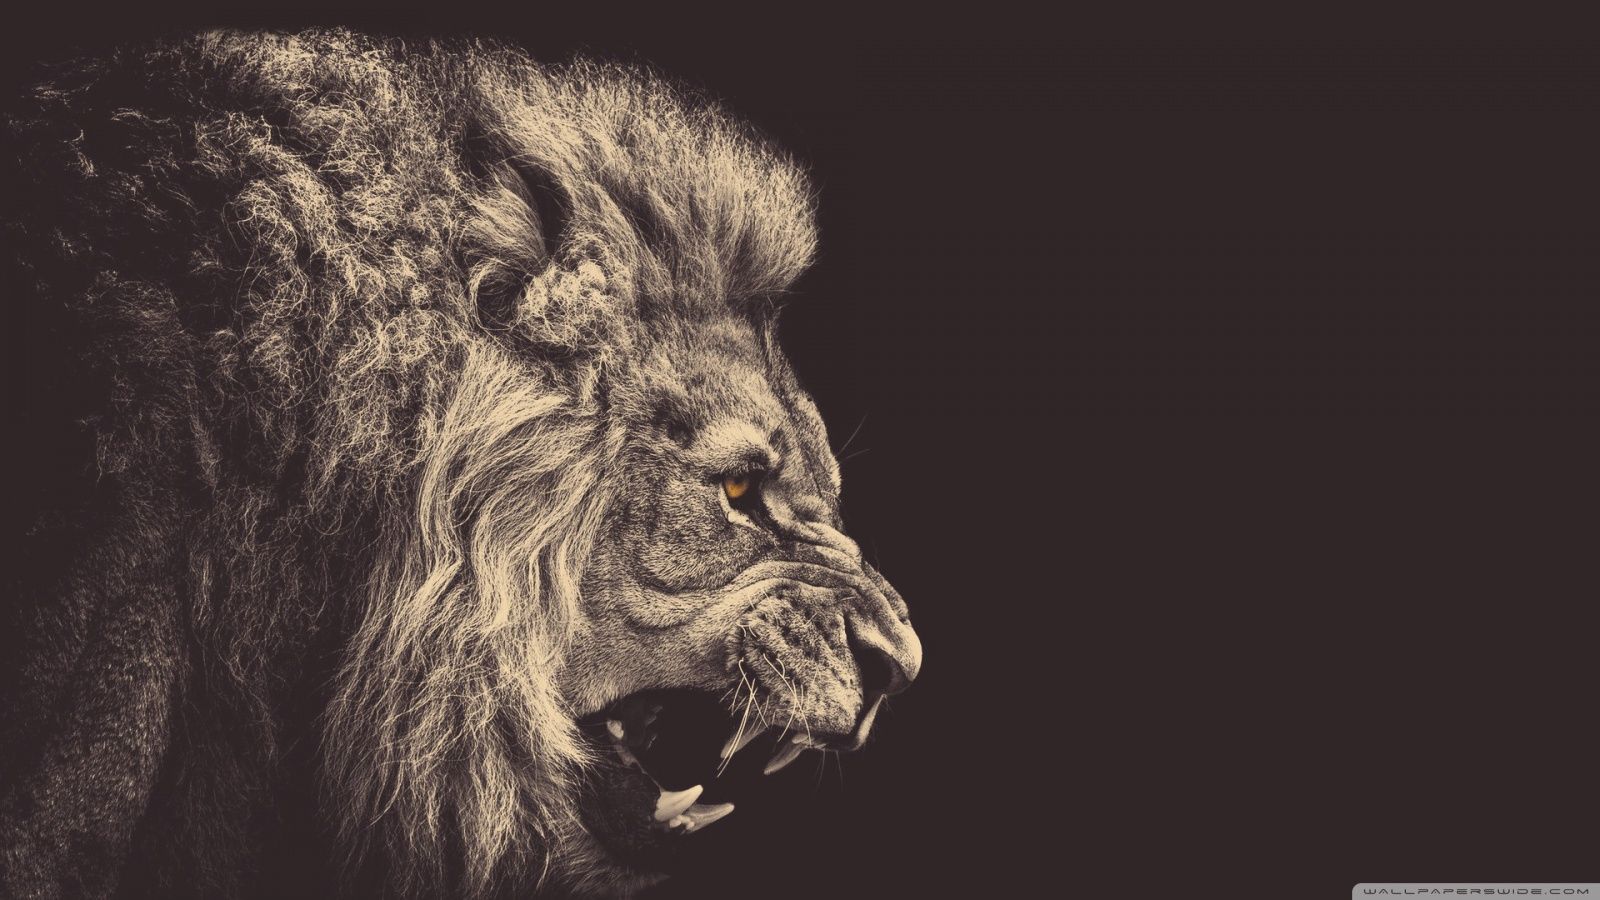 strong wallpaper,lion,big cats,wildlife,felidae,black and white